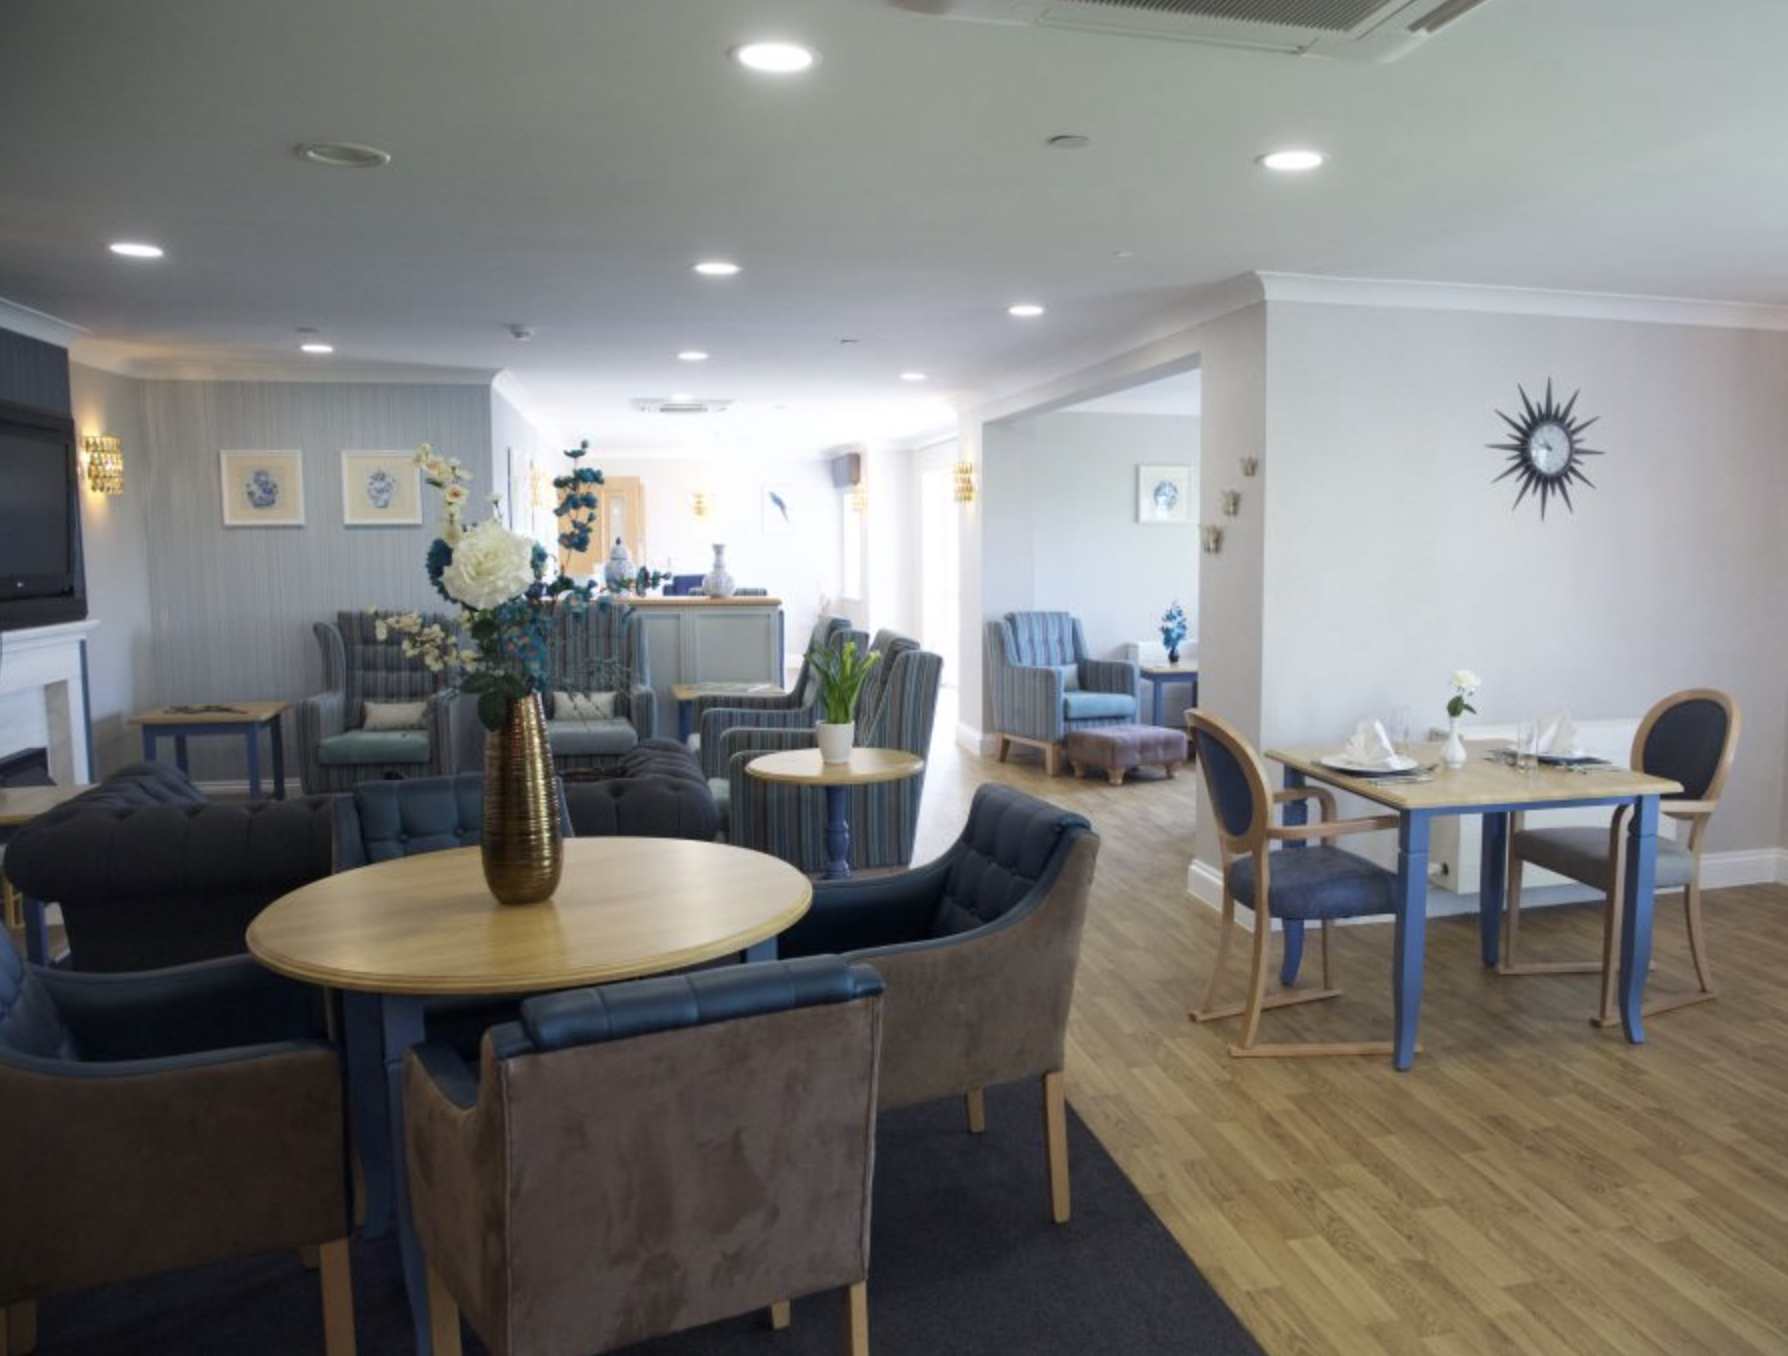 Dining area of Carlton Court care home in Barnet, London